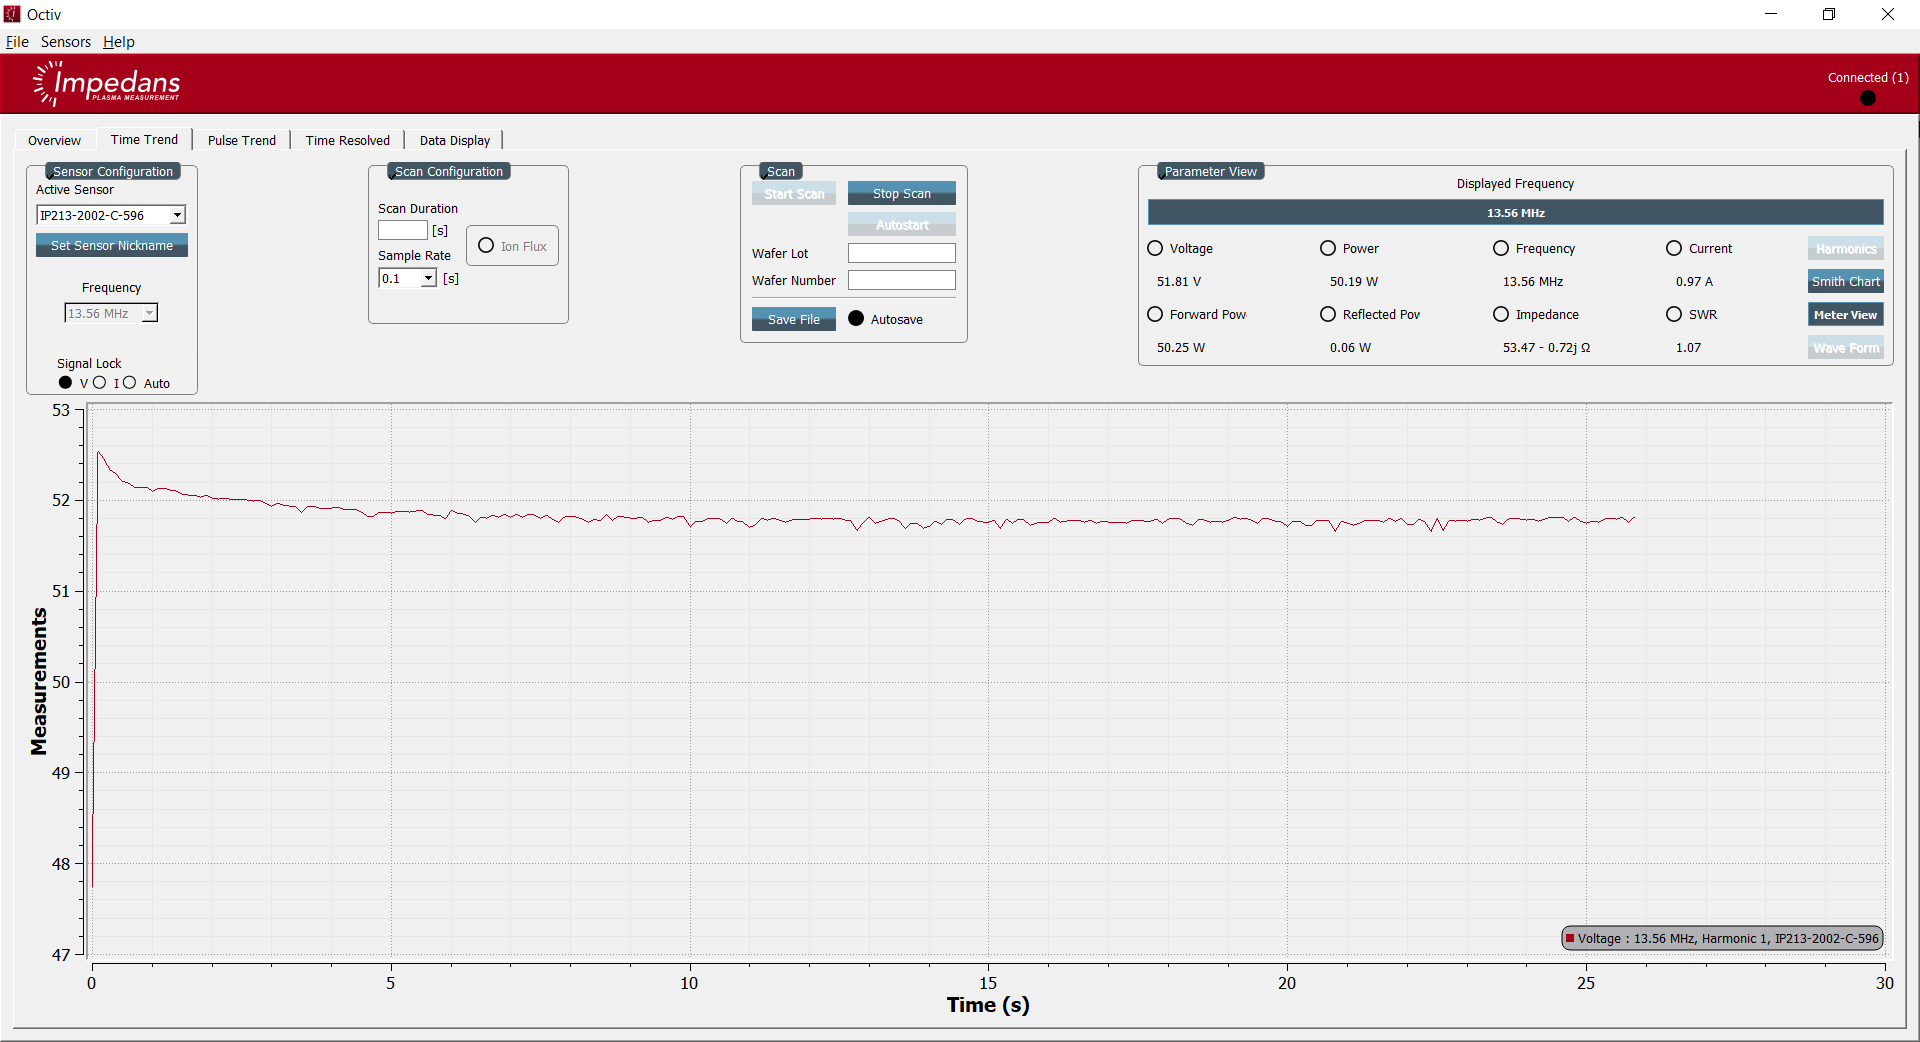 Time Trend Mode being plotted in the Octiv software.